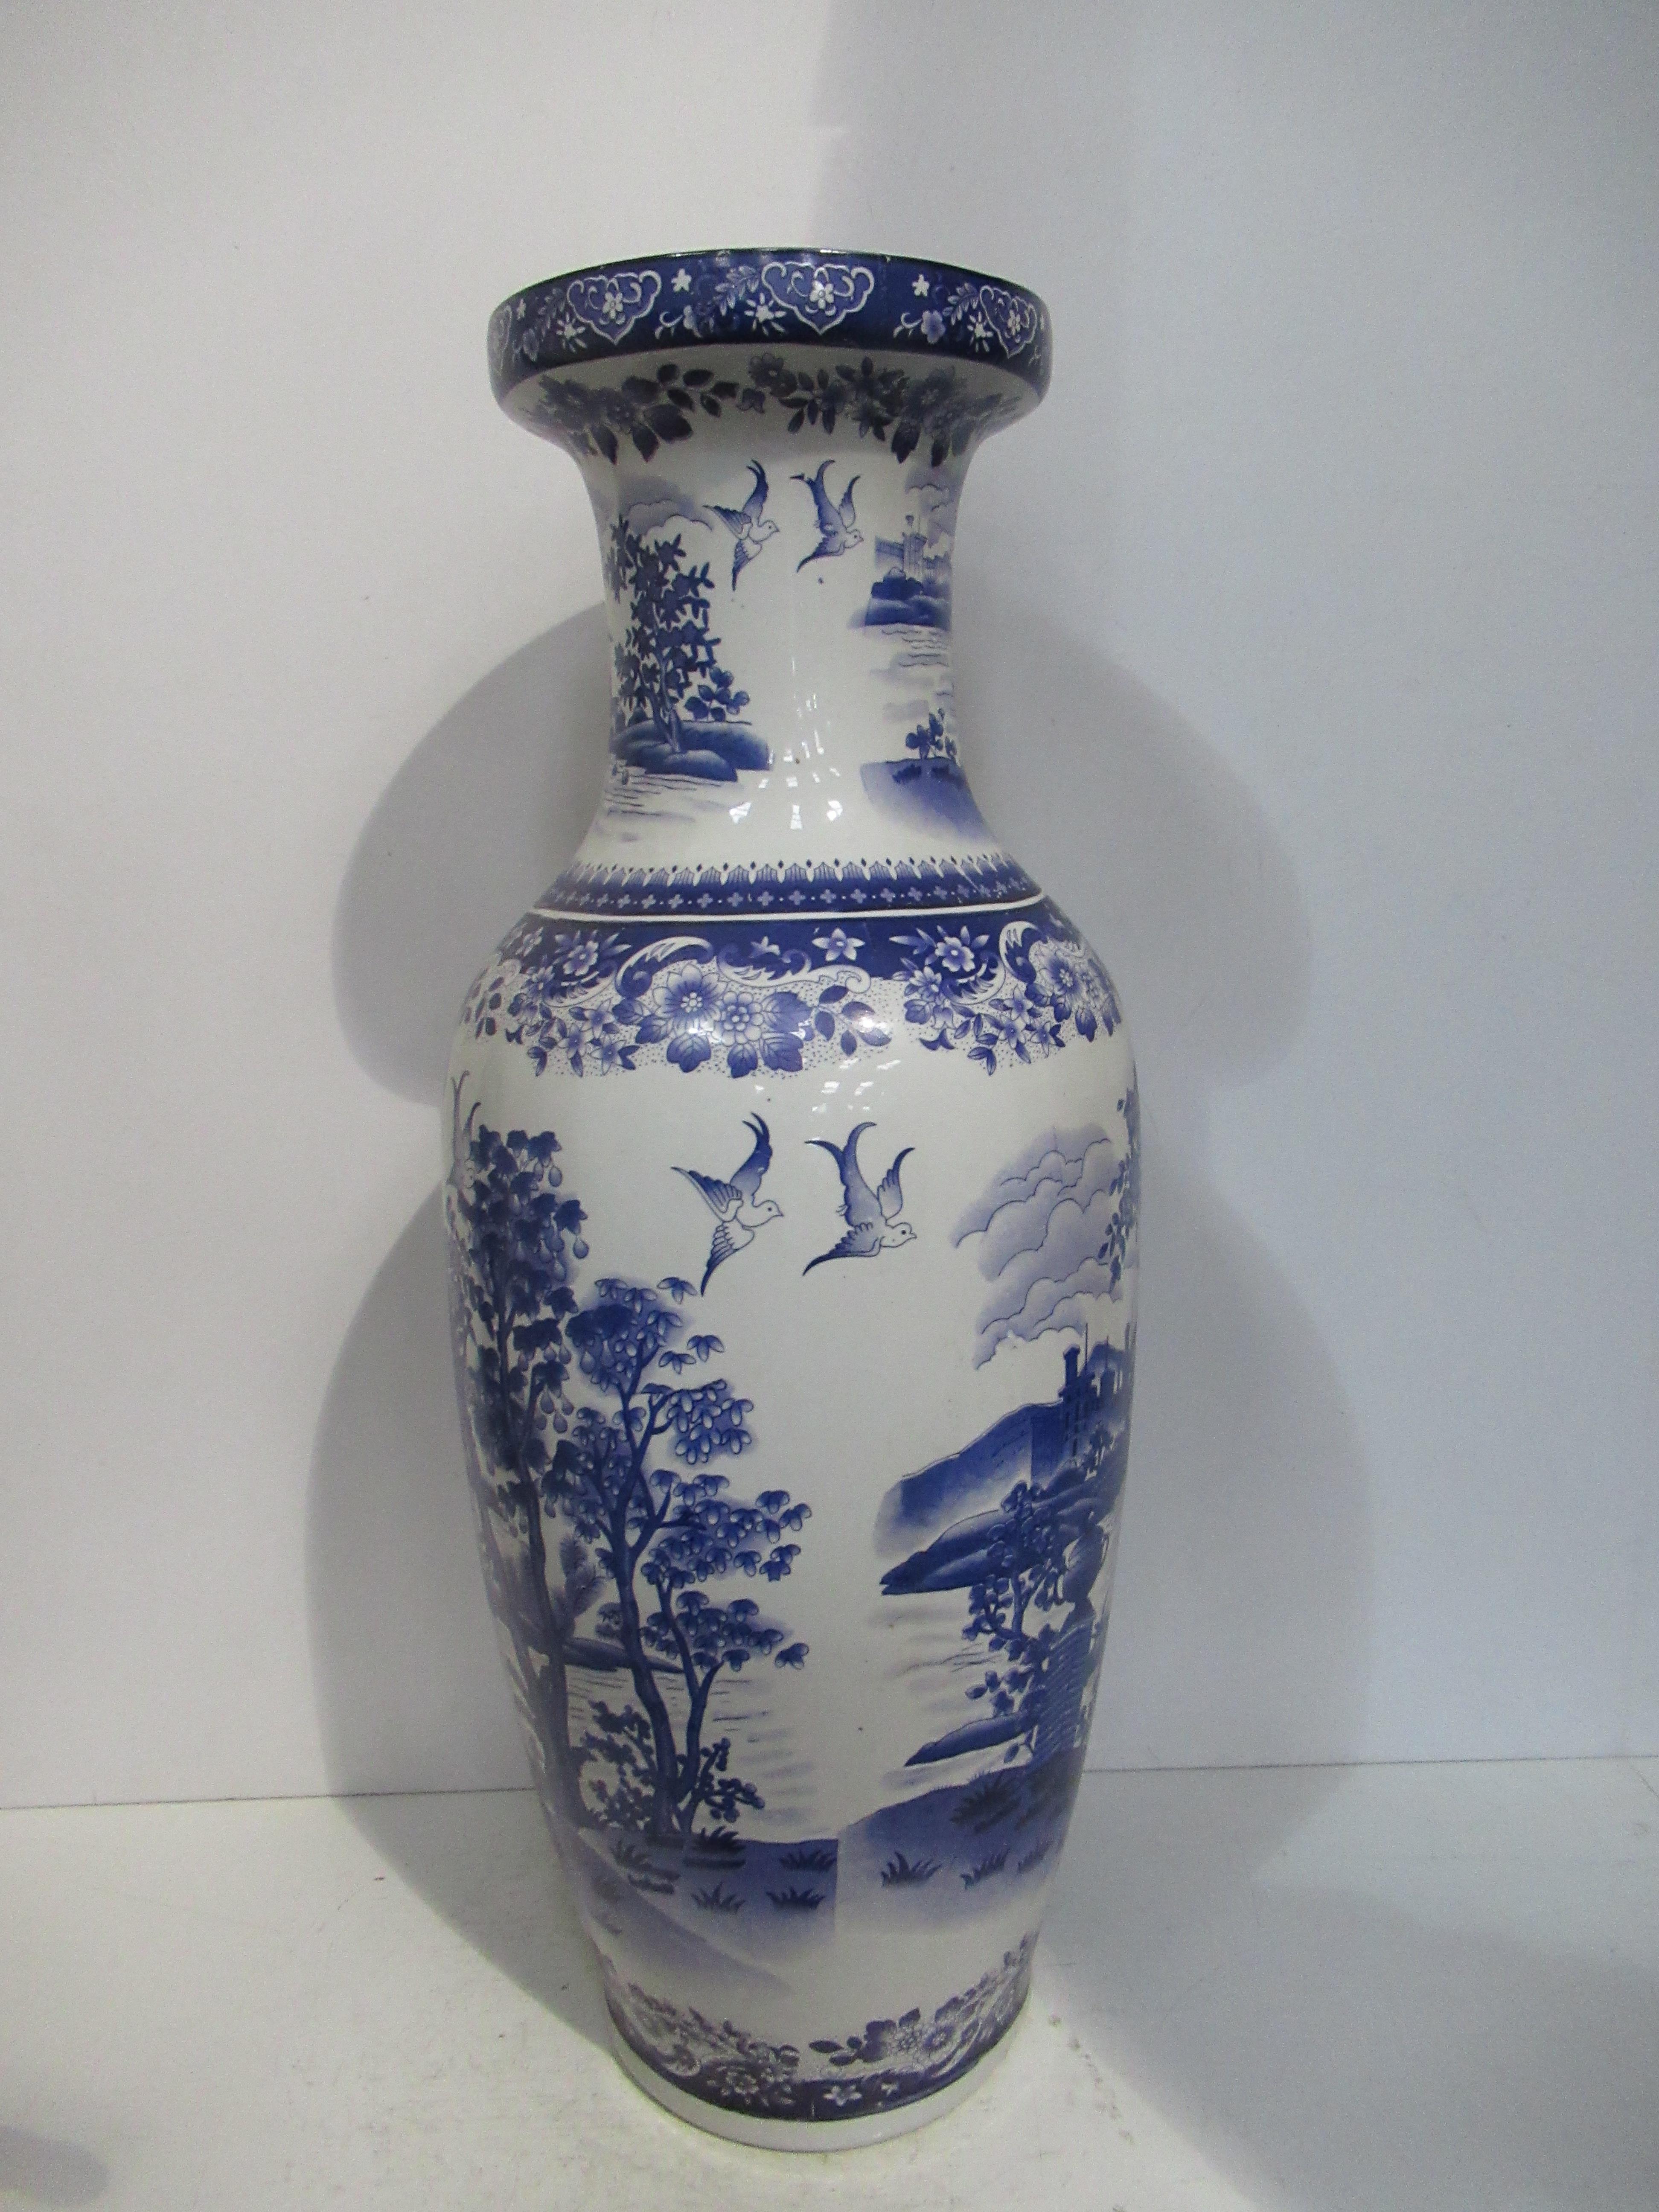 A Blue and White Japanese Vase (60cm Tall) - Image 2 of 5